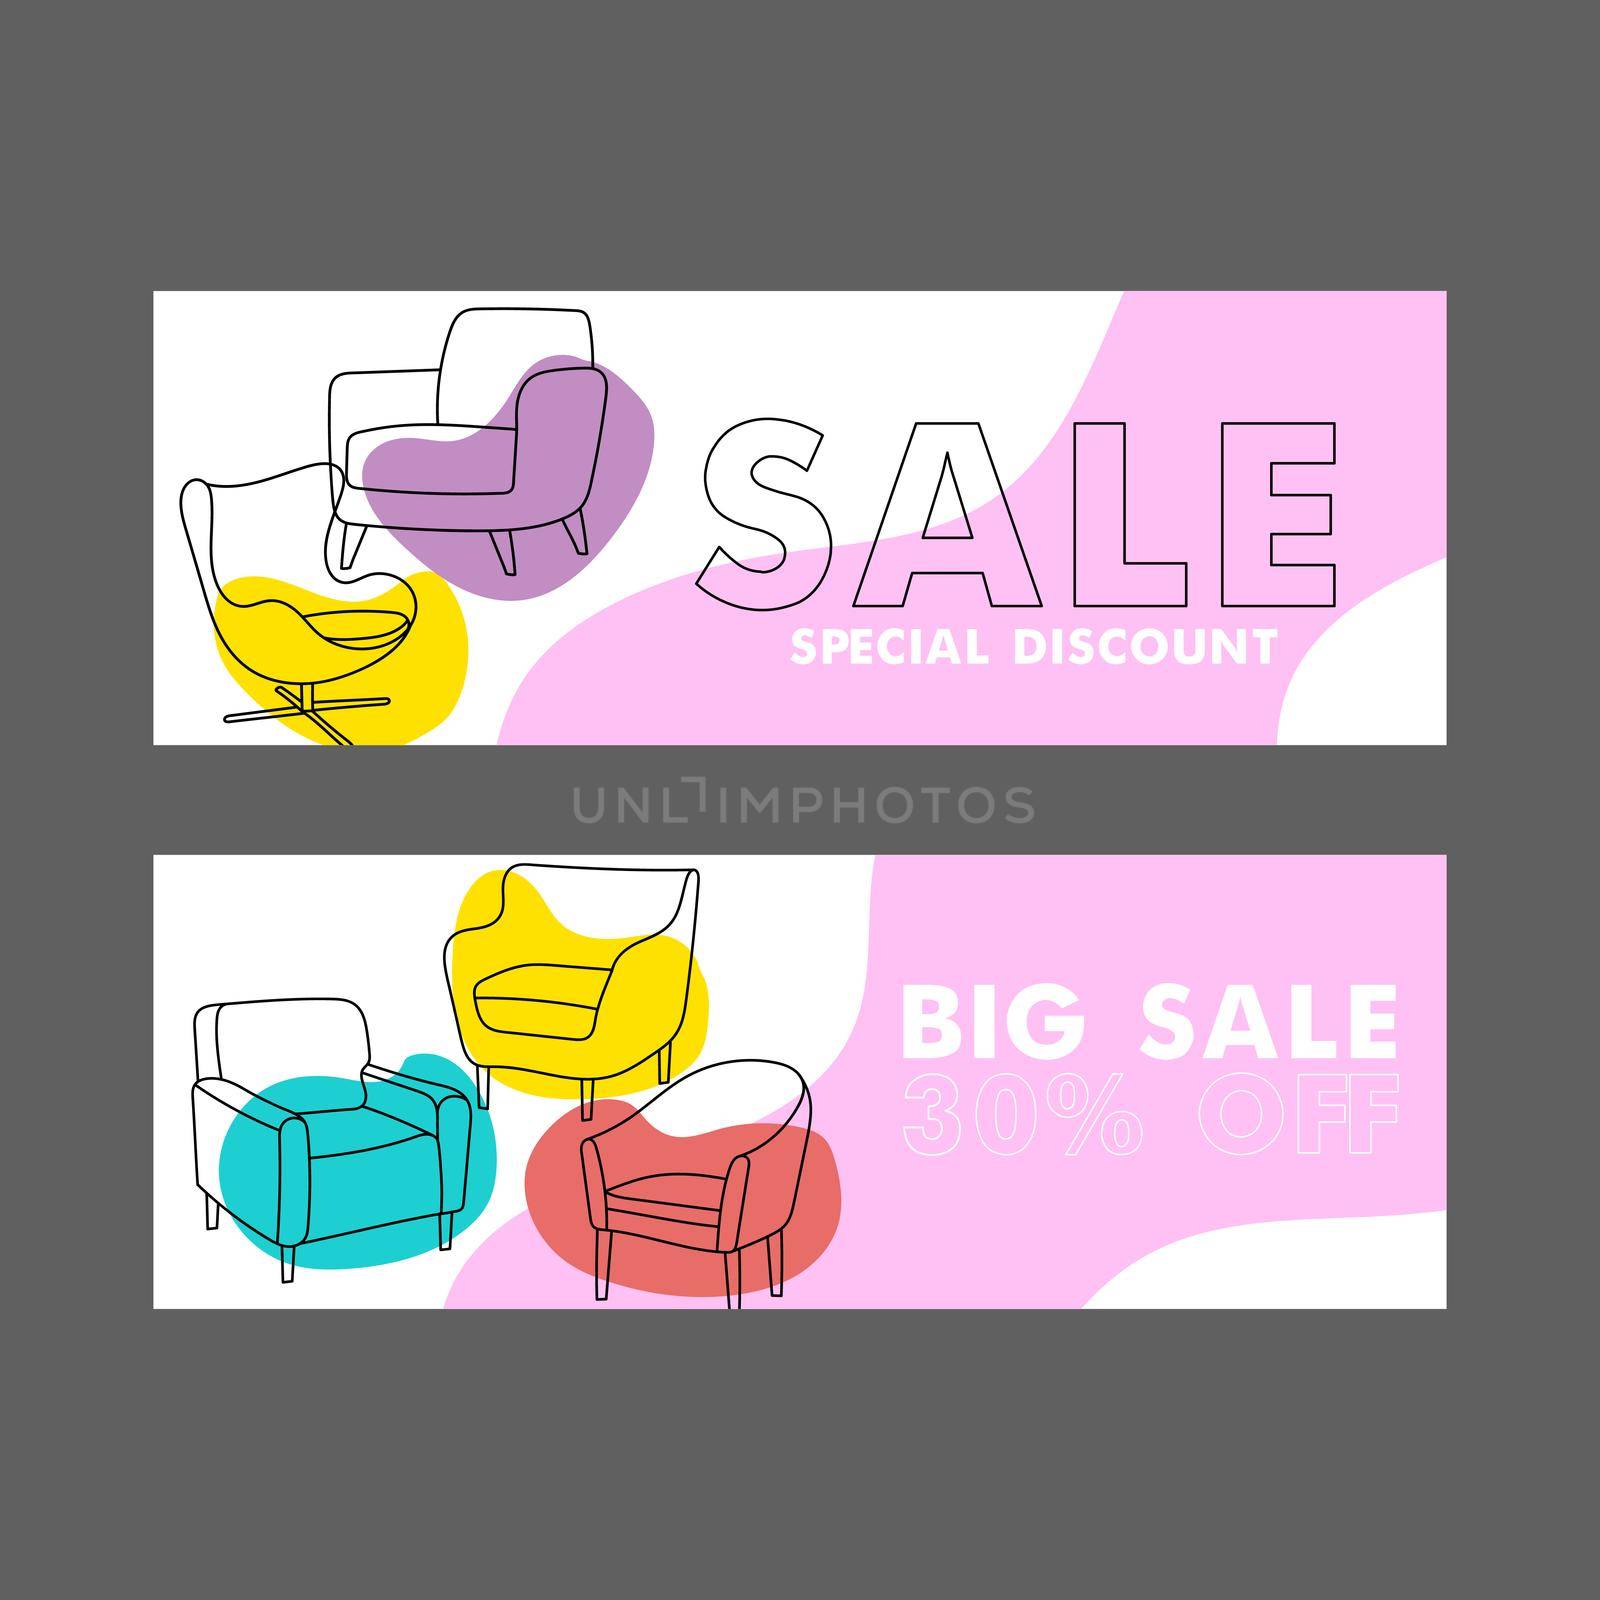 Furniture shop sale and discounts for clients, mega offering. Home interior design and furnishing, modern armchair. Vector banners